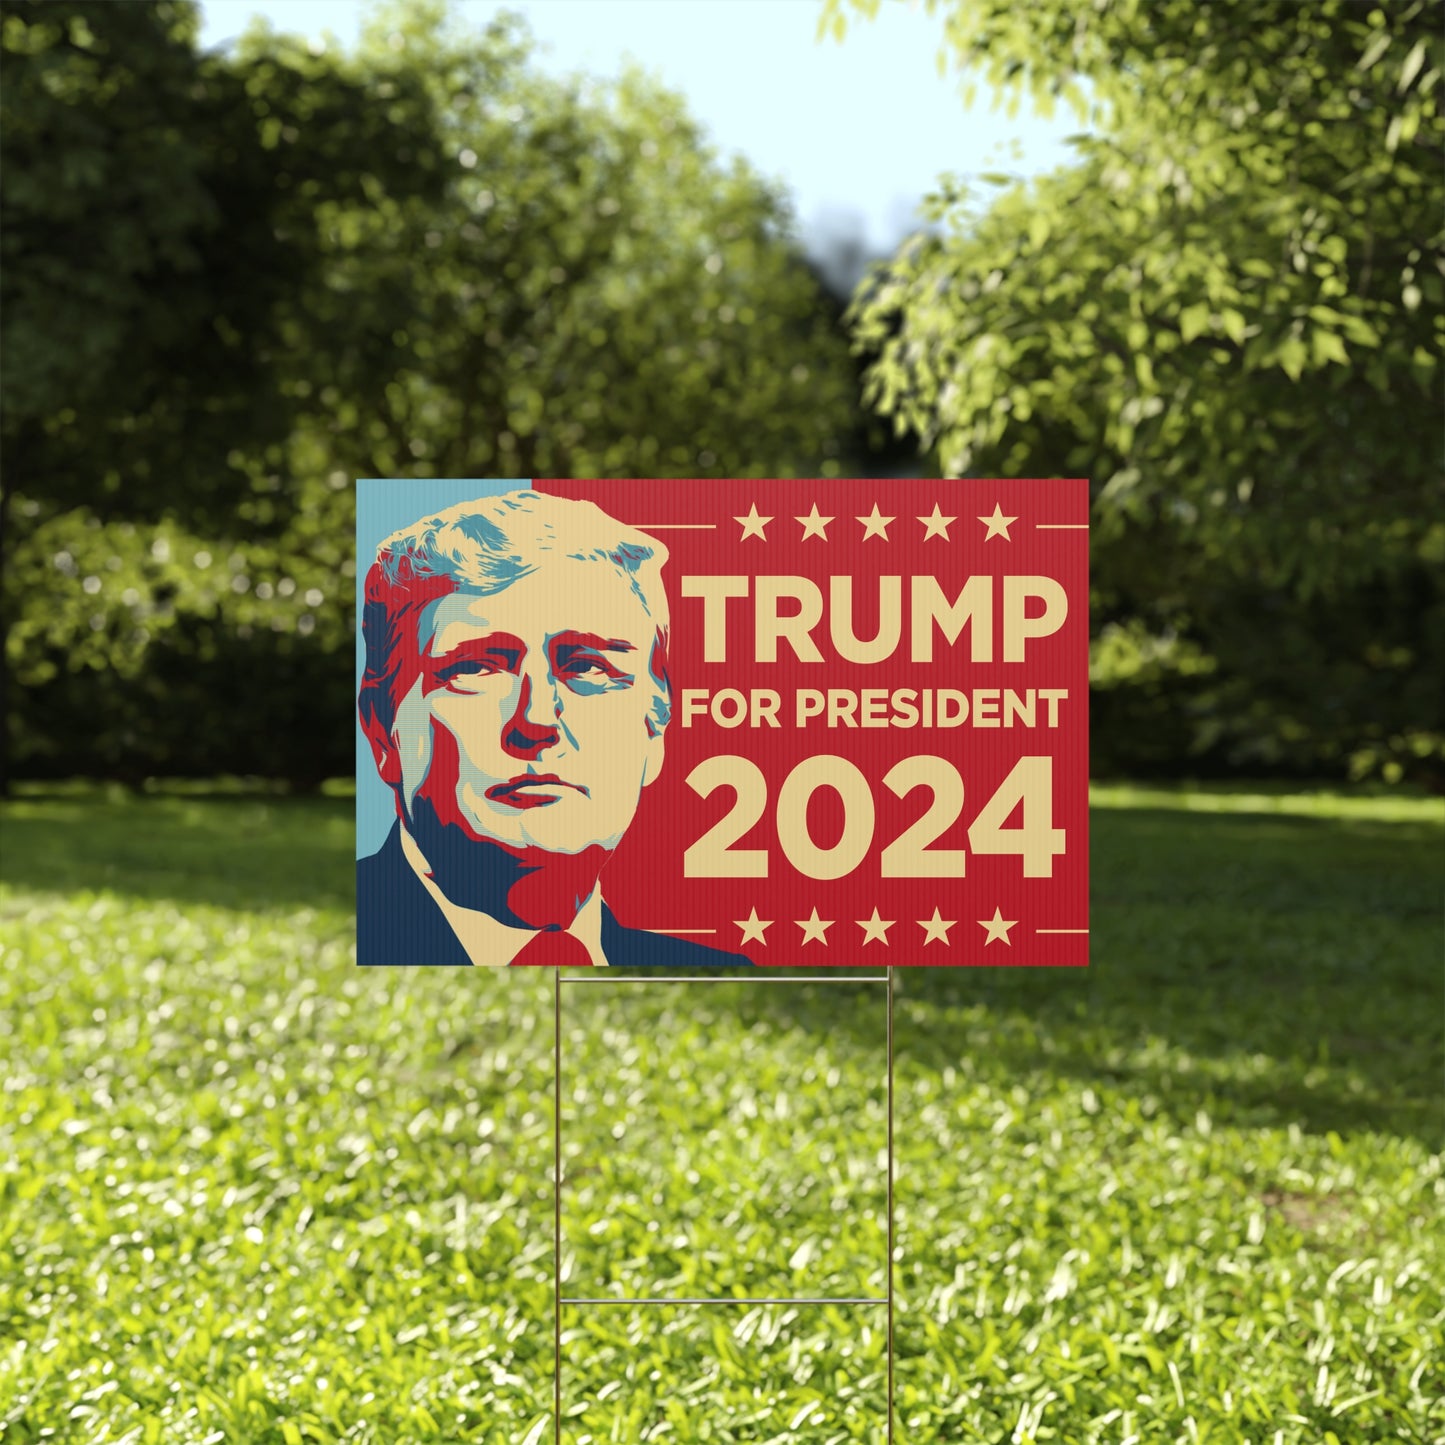 Trump For President 2024 Yard Sign